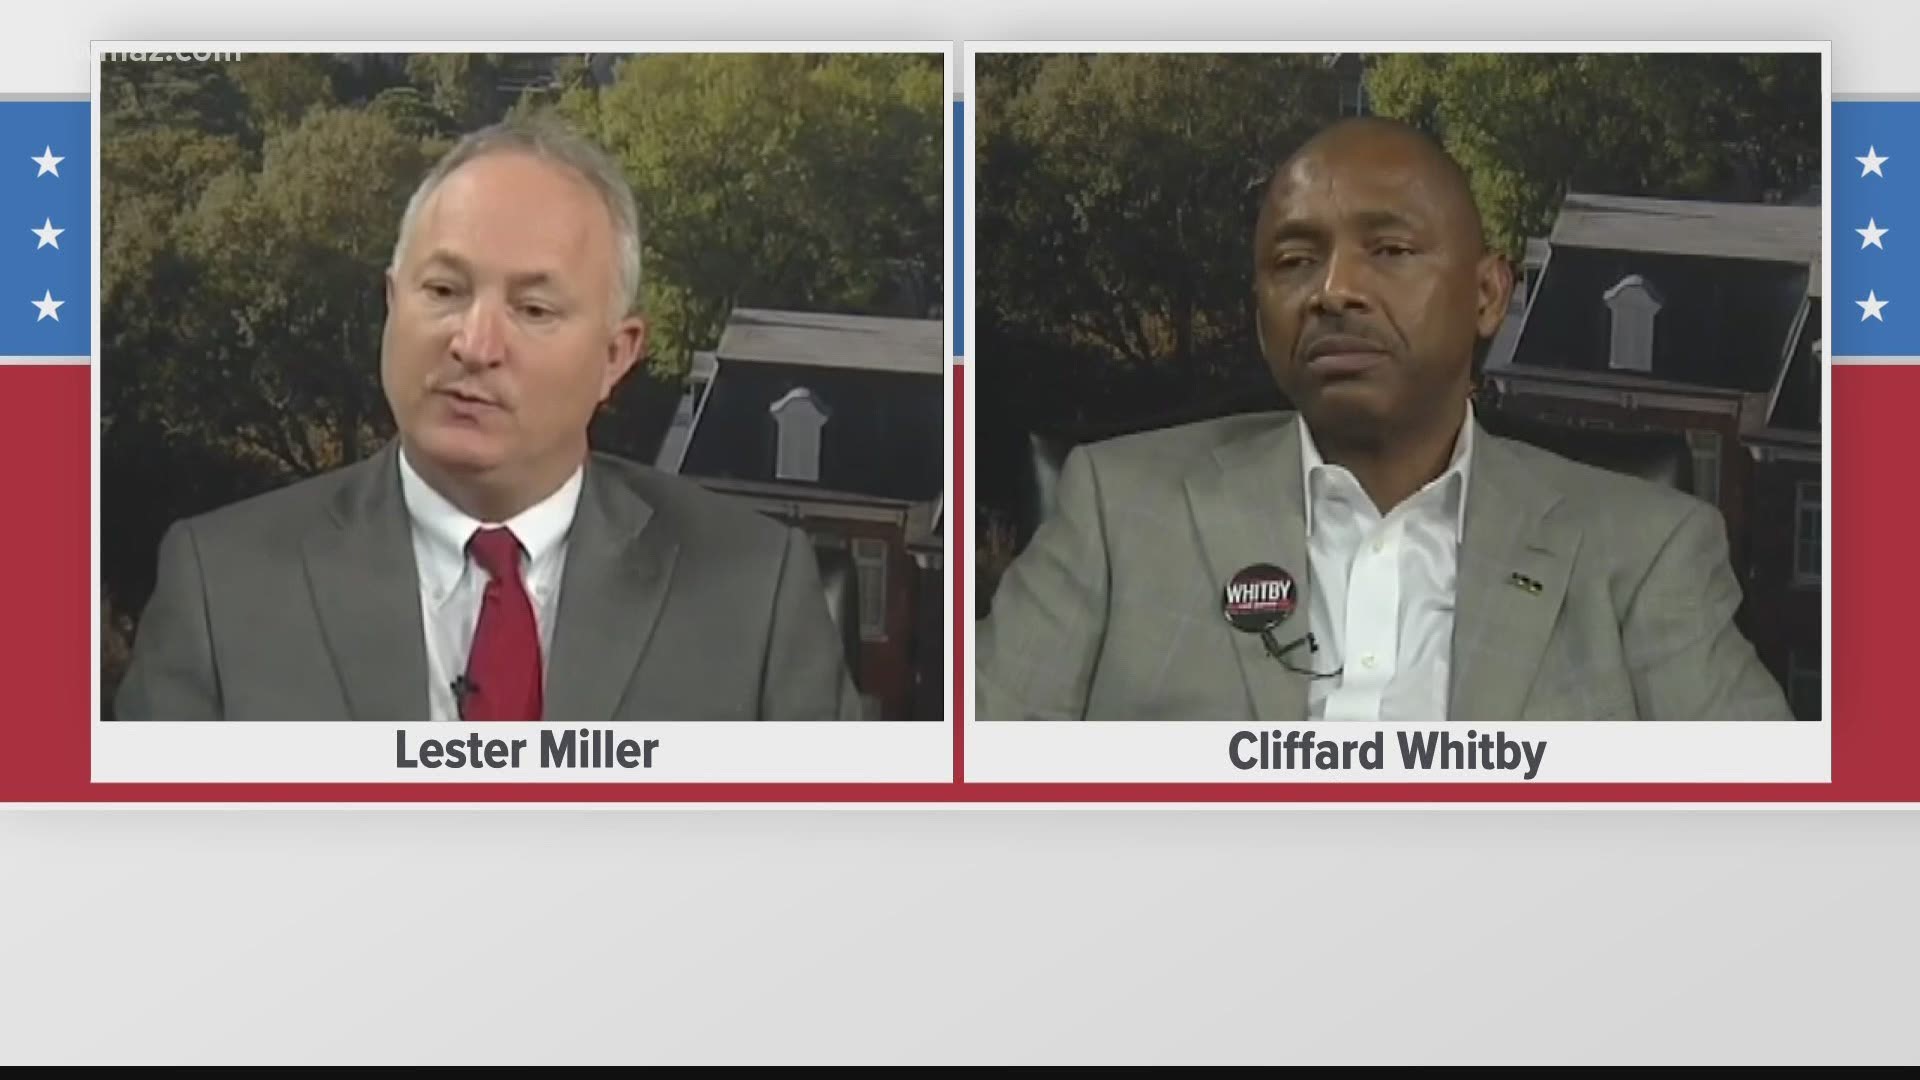 Bibb County mayoral candidate Cliffard Whitby and Lester Miller are preparing for a runoff election next month.